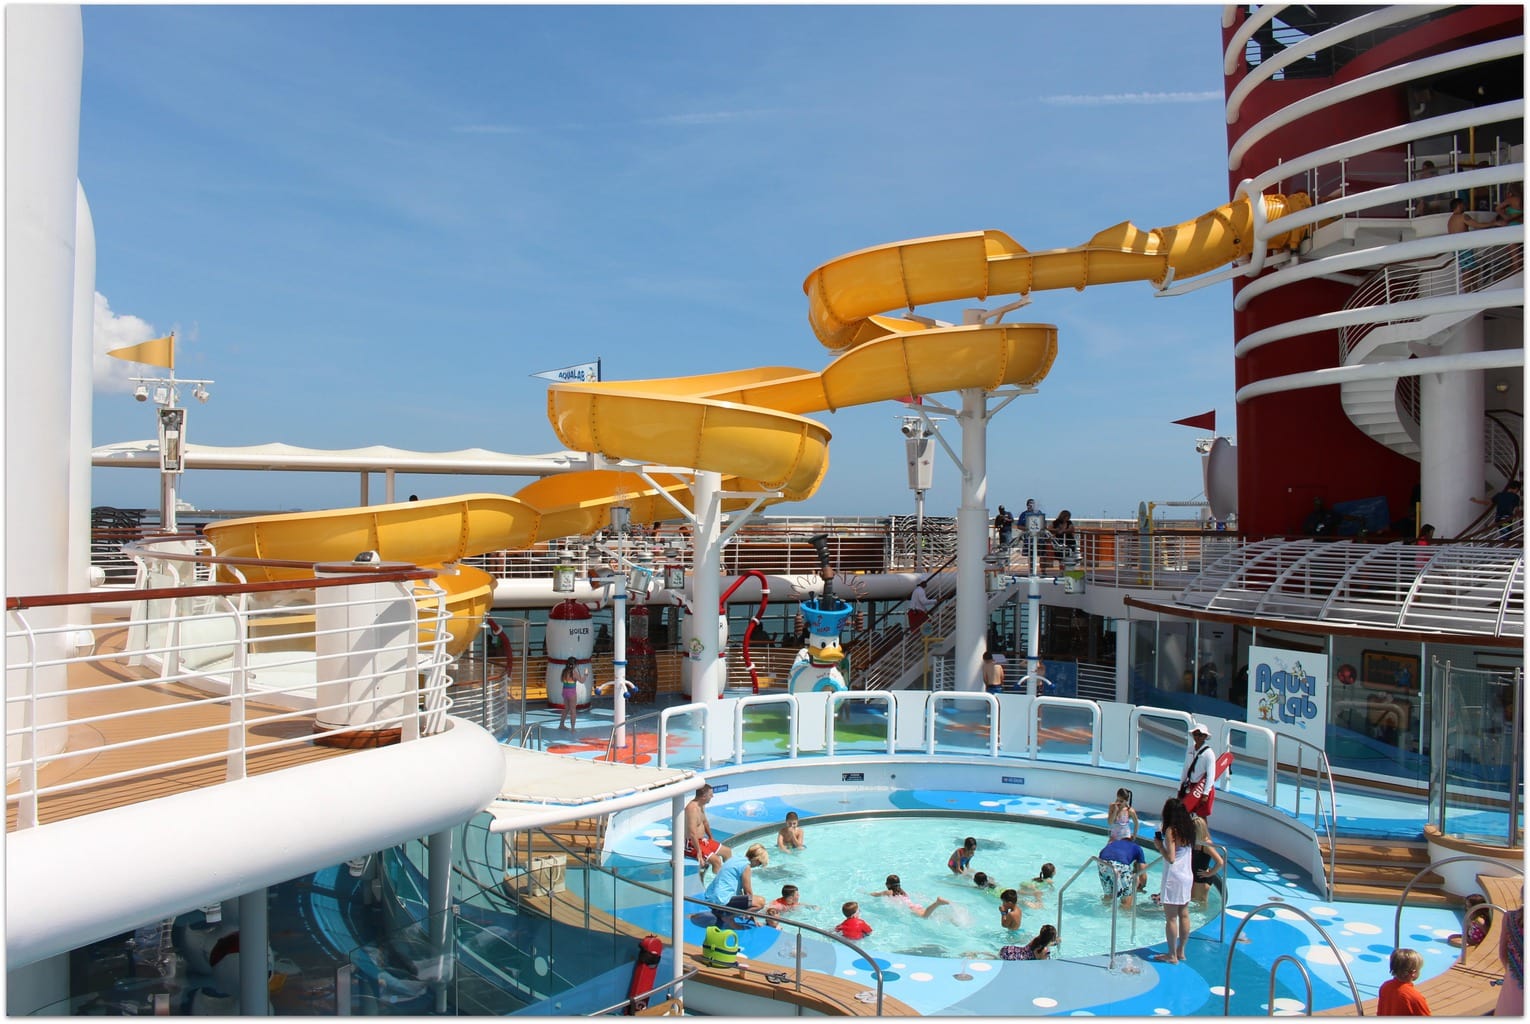 The Disney Magic Cruise Ship is so amazing! Forgive the cliché, but magical is the only way to describe sailing with Disney! Every moment of your trip is thought out, from excursion opportunities to rest and relaxation. 